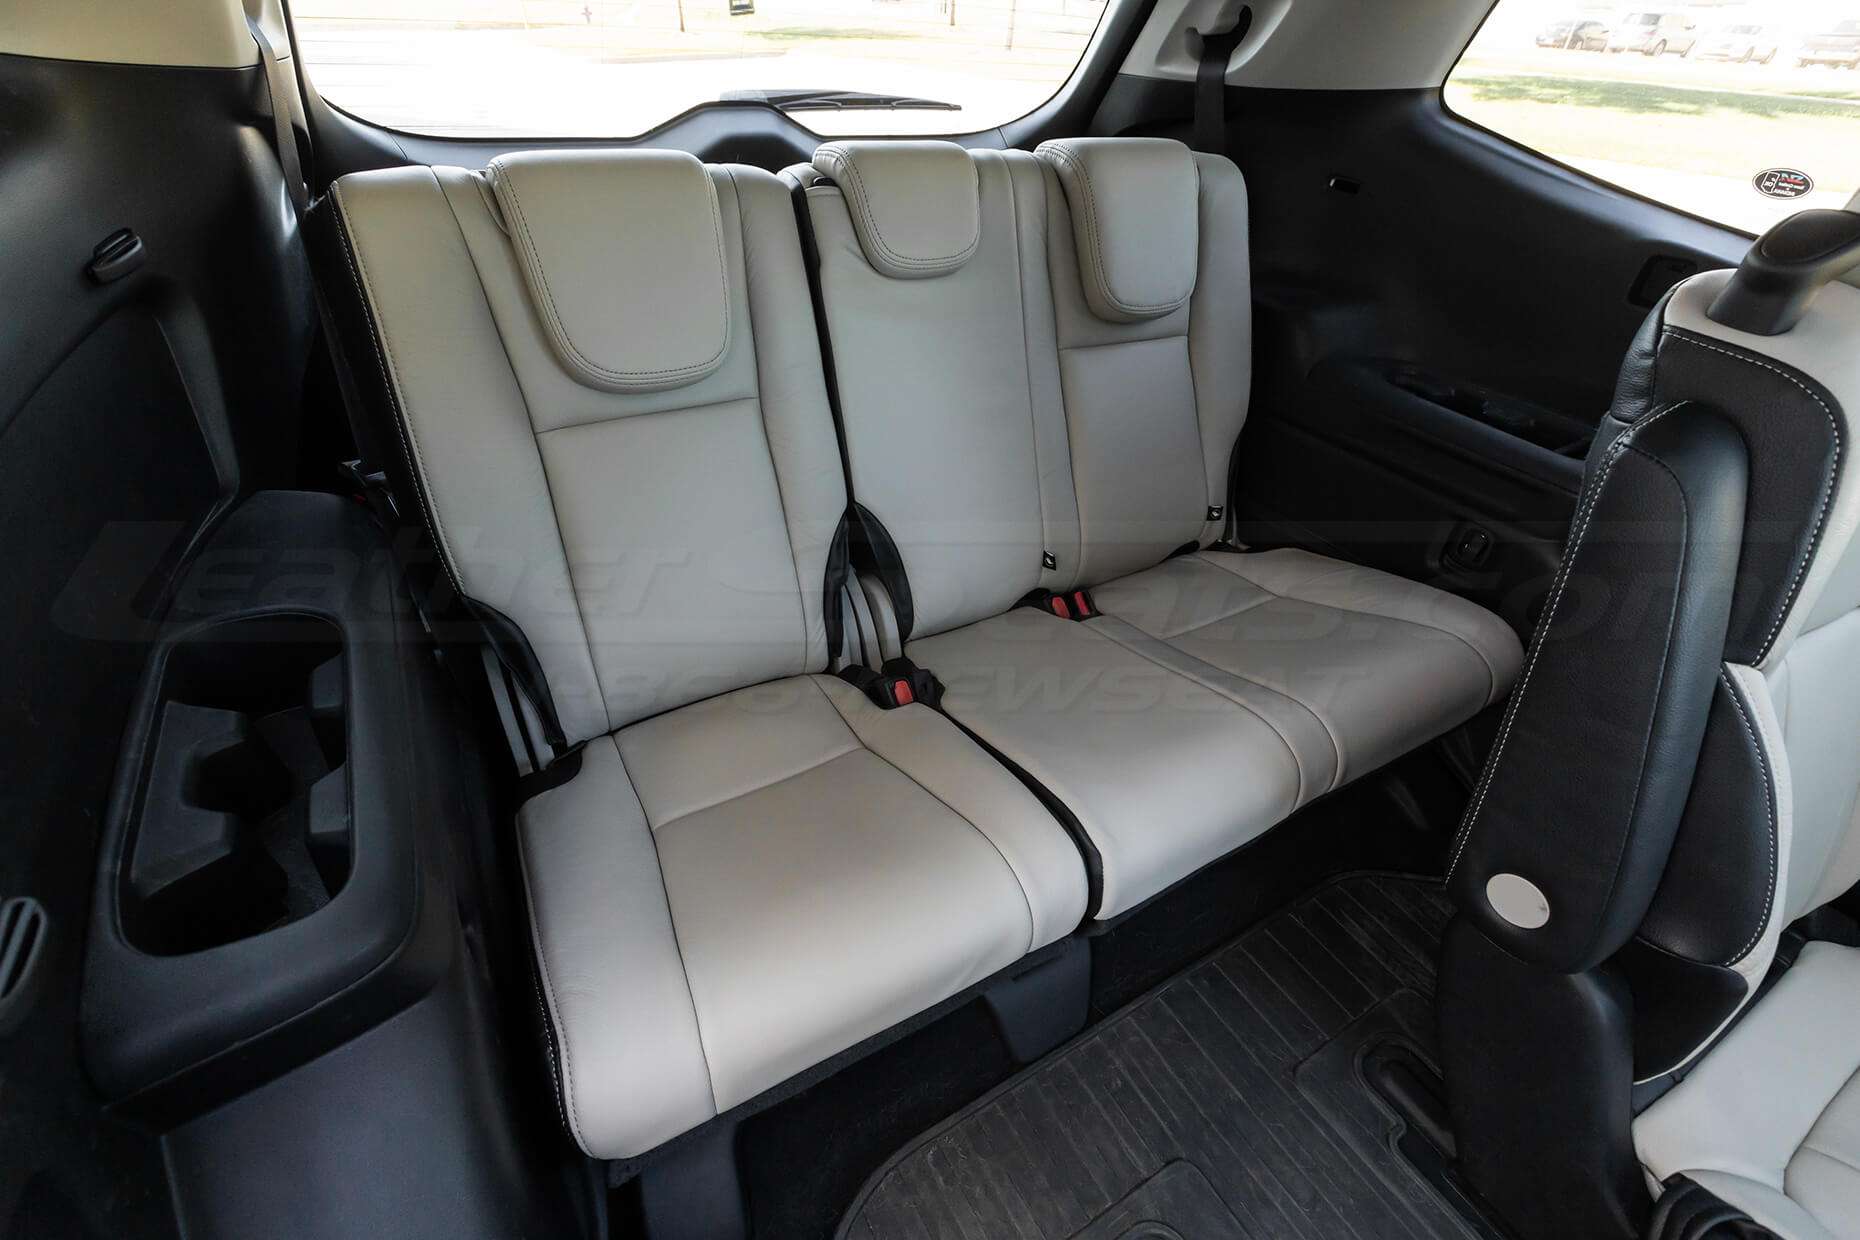 Installed 3rd row leather seats - Black & Dune - Passenger side view